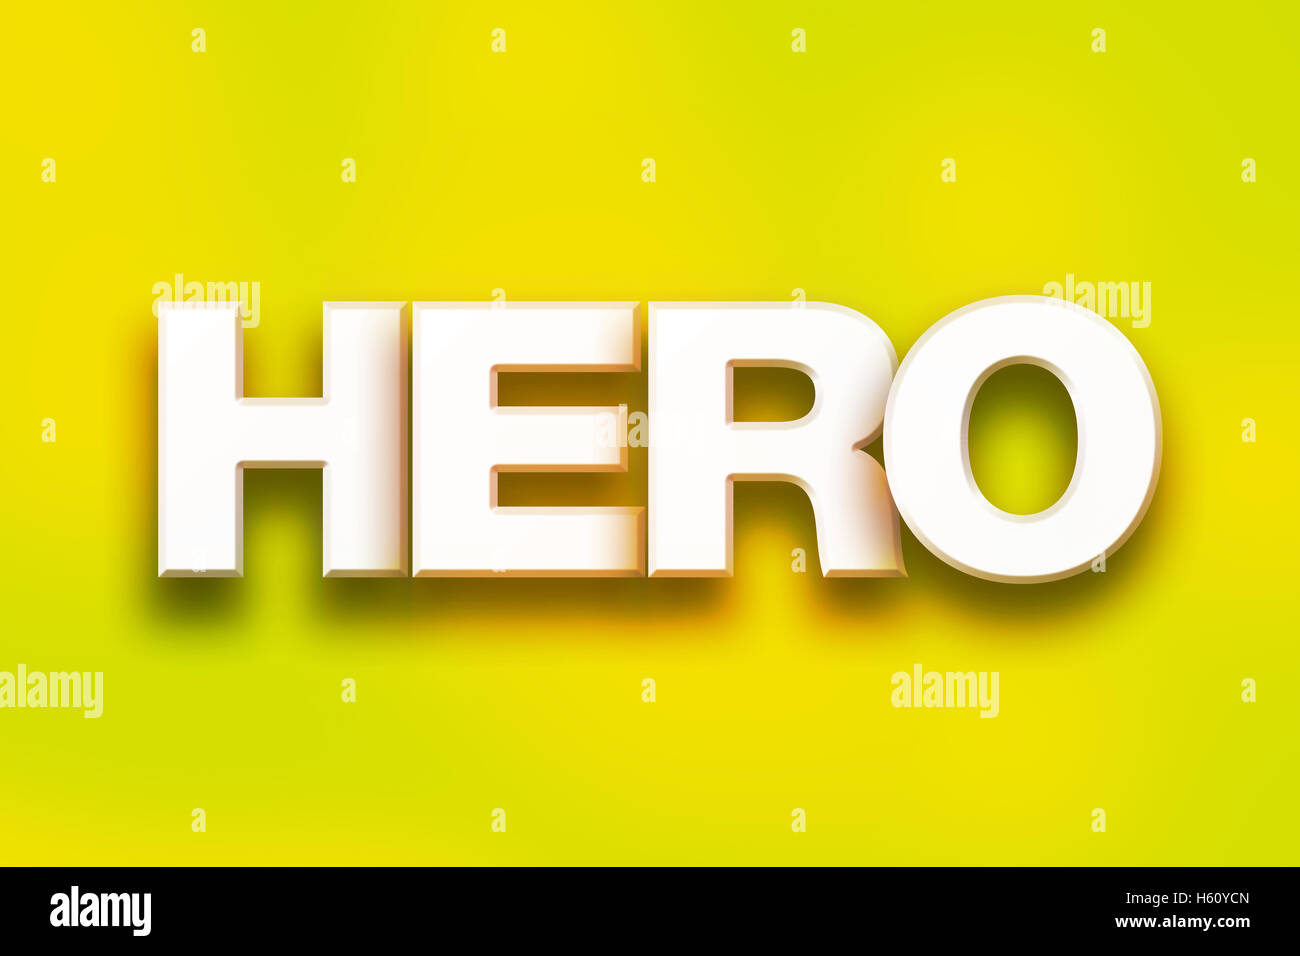 The word 'Hero' written in white 3D letters on a colorful background concept and theme. Stock Photo